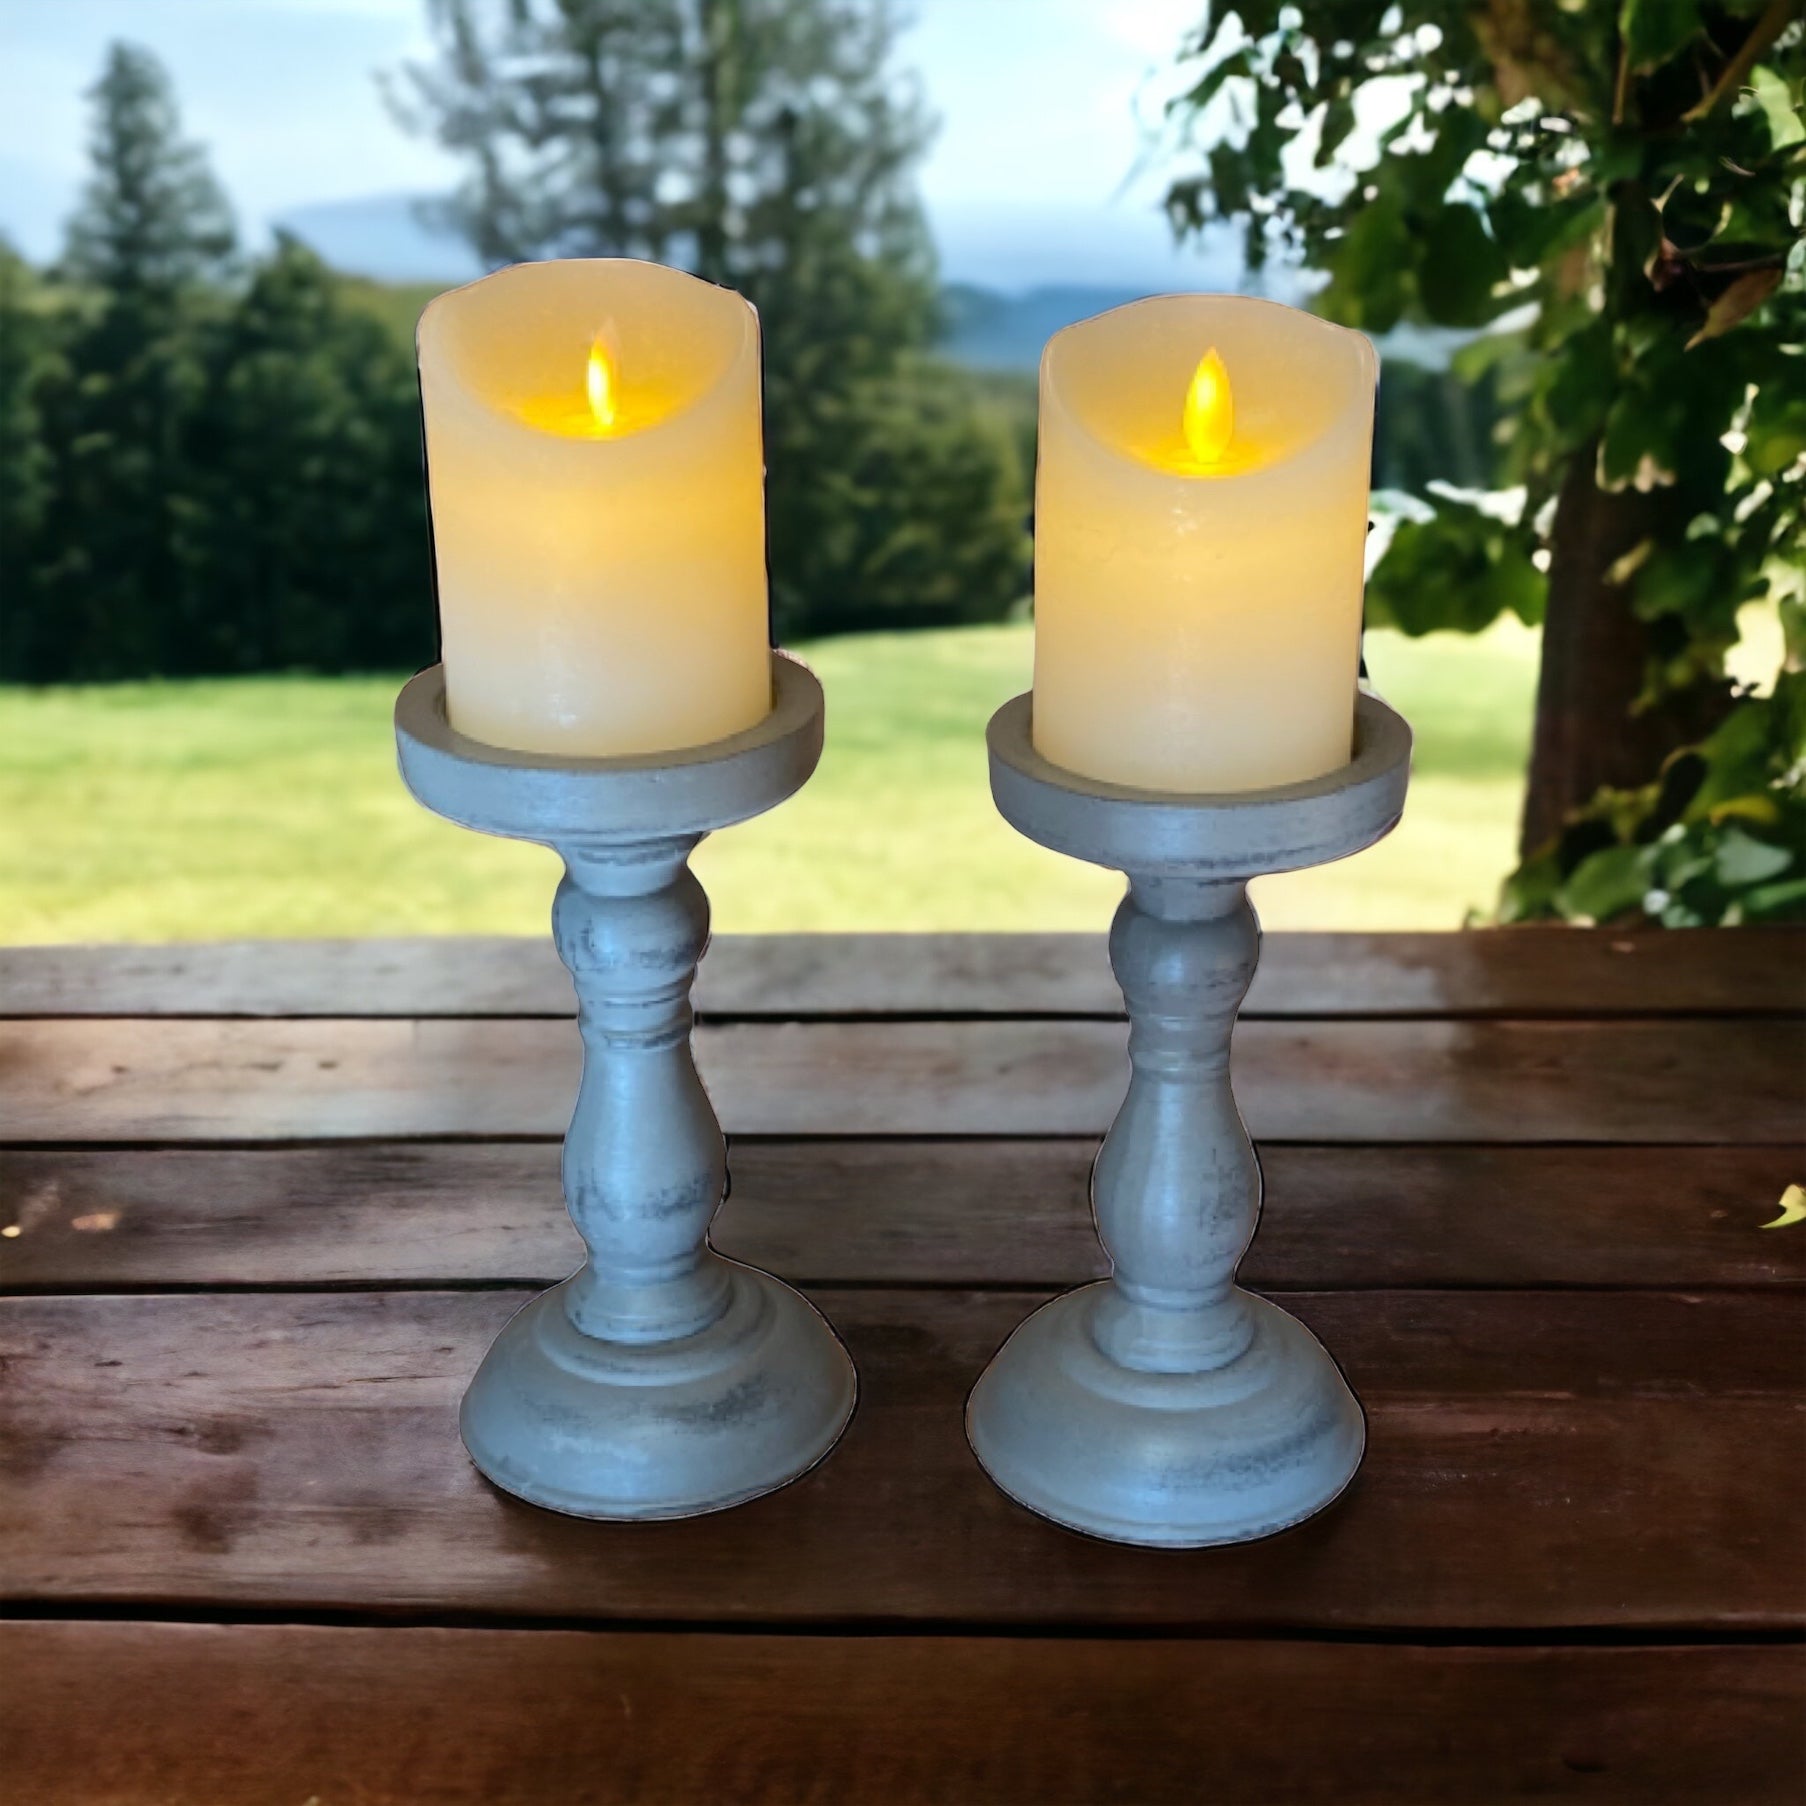 Candle Holder Pillar Provincial Grey Set of 2 - The Renmy Store Homewares & Gifts 